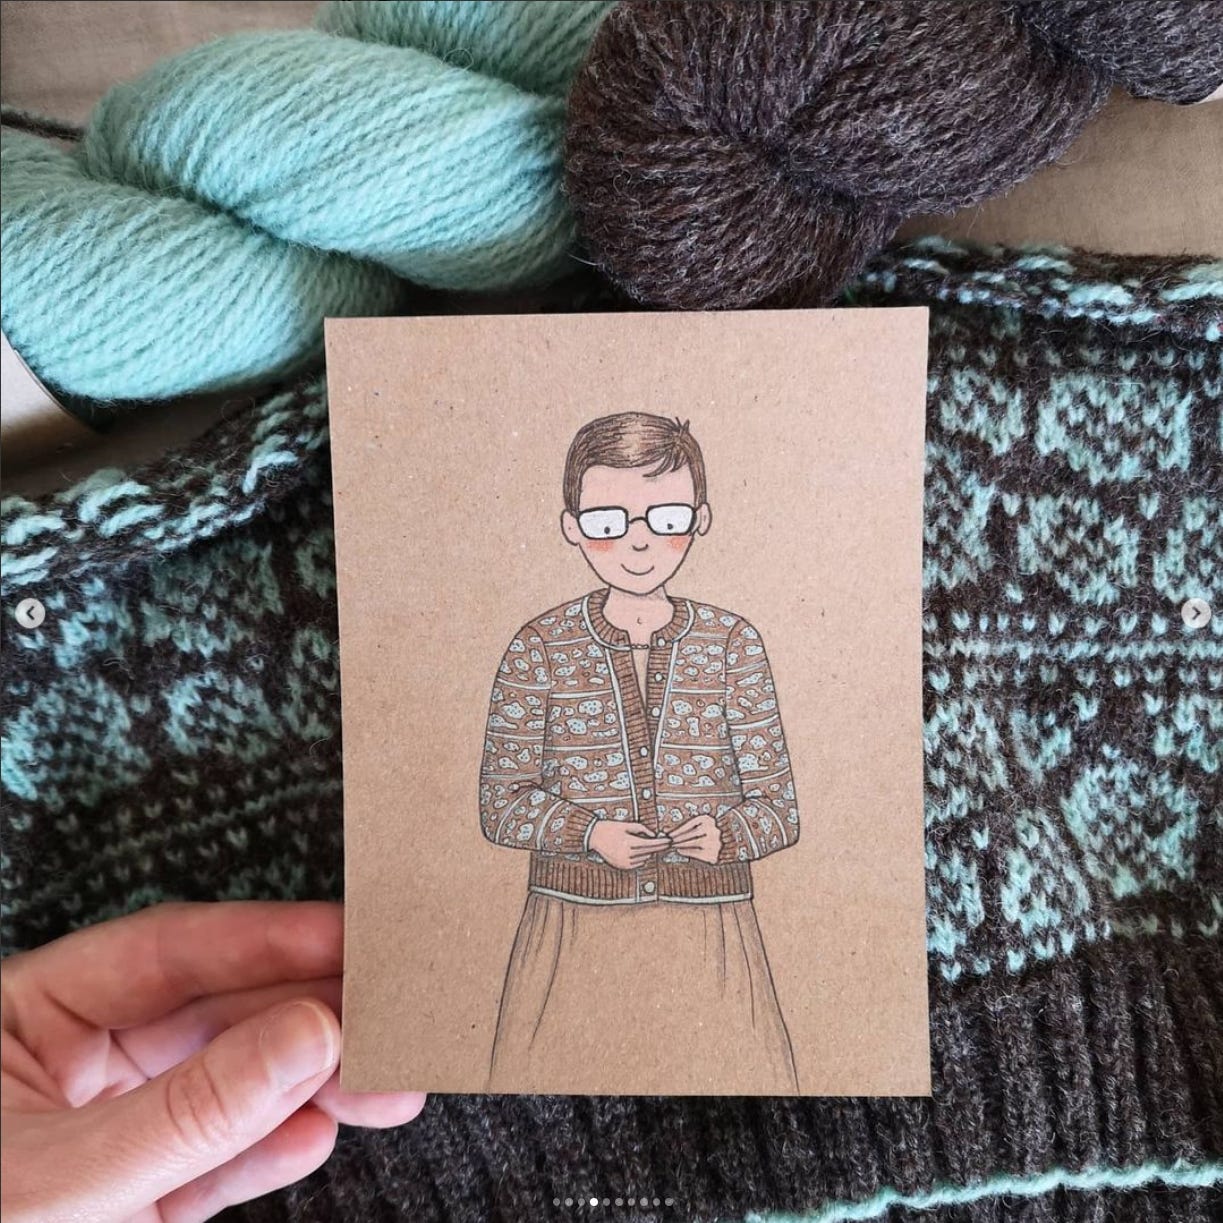 A white person's hand holds a sketch on a piece of brown paper, in front of a pile of knitting and yarn. The sketch is of a short-haired person with glasses buttoning up a colourwork cardigan. The cardigan is brown and pale blue with motifs that resemble lichen-covered tree bark. The knitting beneath the picture is said cardigan coming to life, with two skeins of yarn lying beside it.